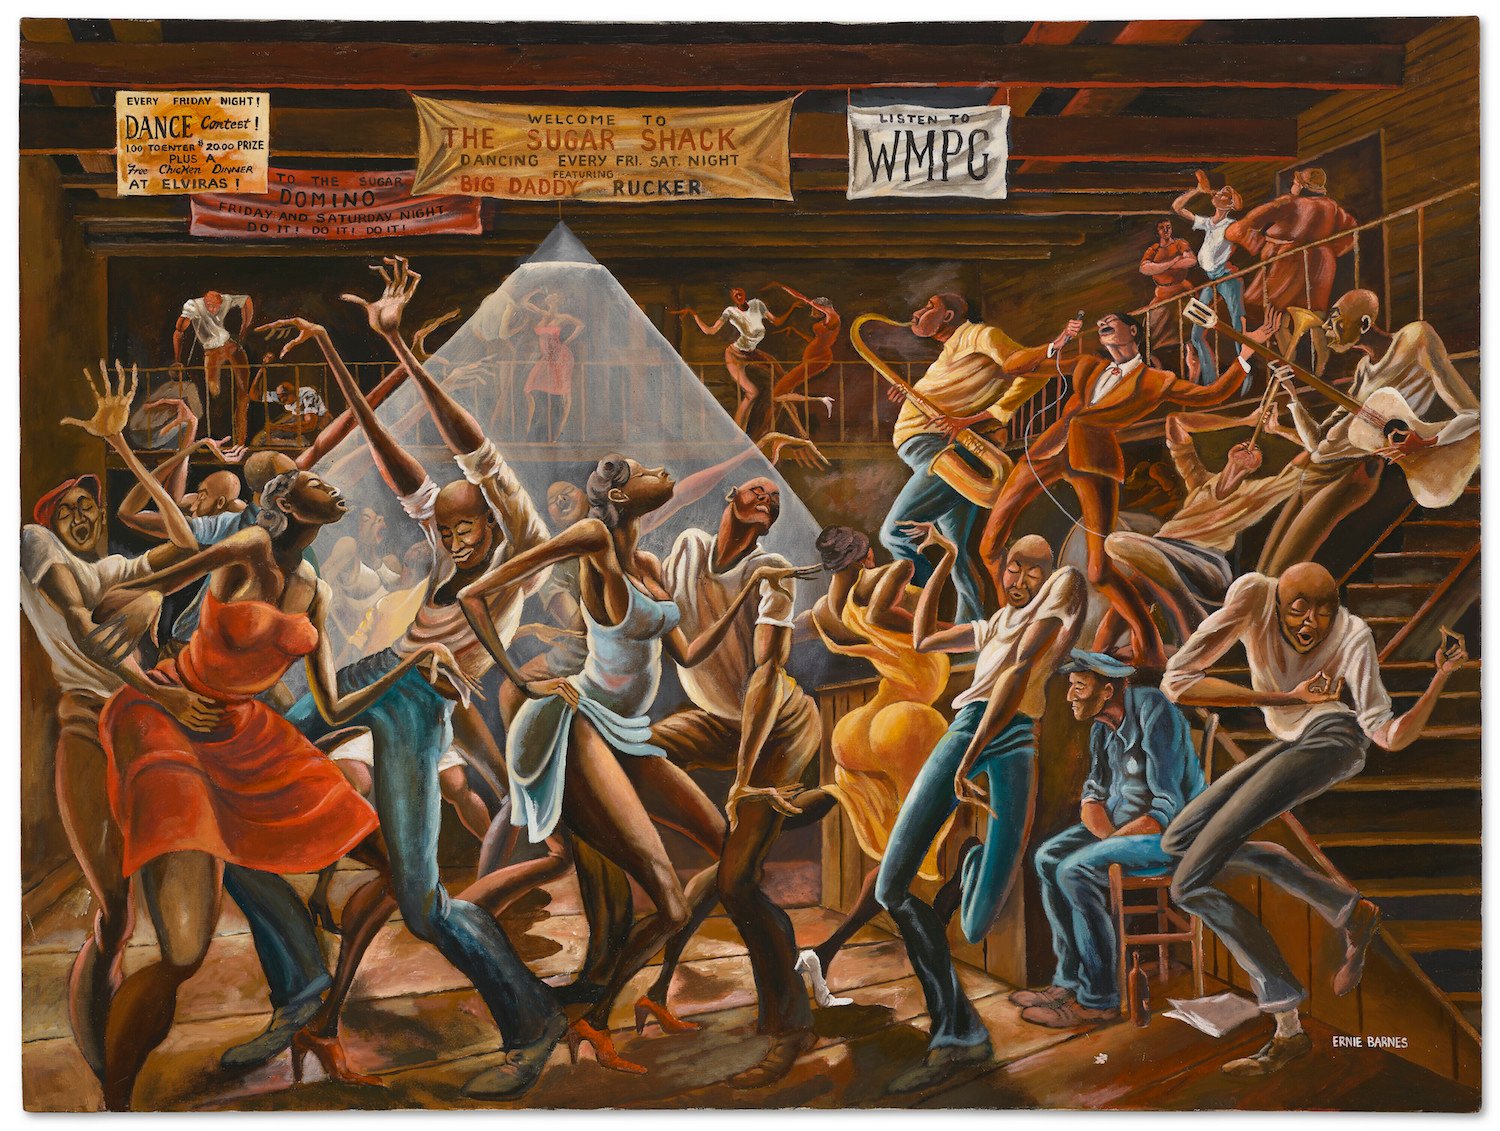 Ernie Barnes Stole the Show at Christie’s With His .3 Million Painting.  Here Are 3 Things You Might Not Know About ‘The Sugar Shack’